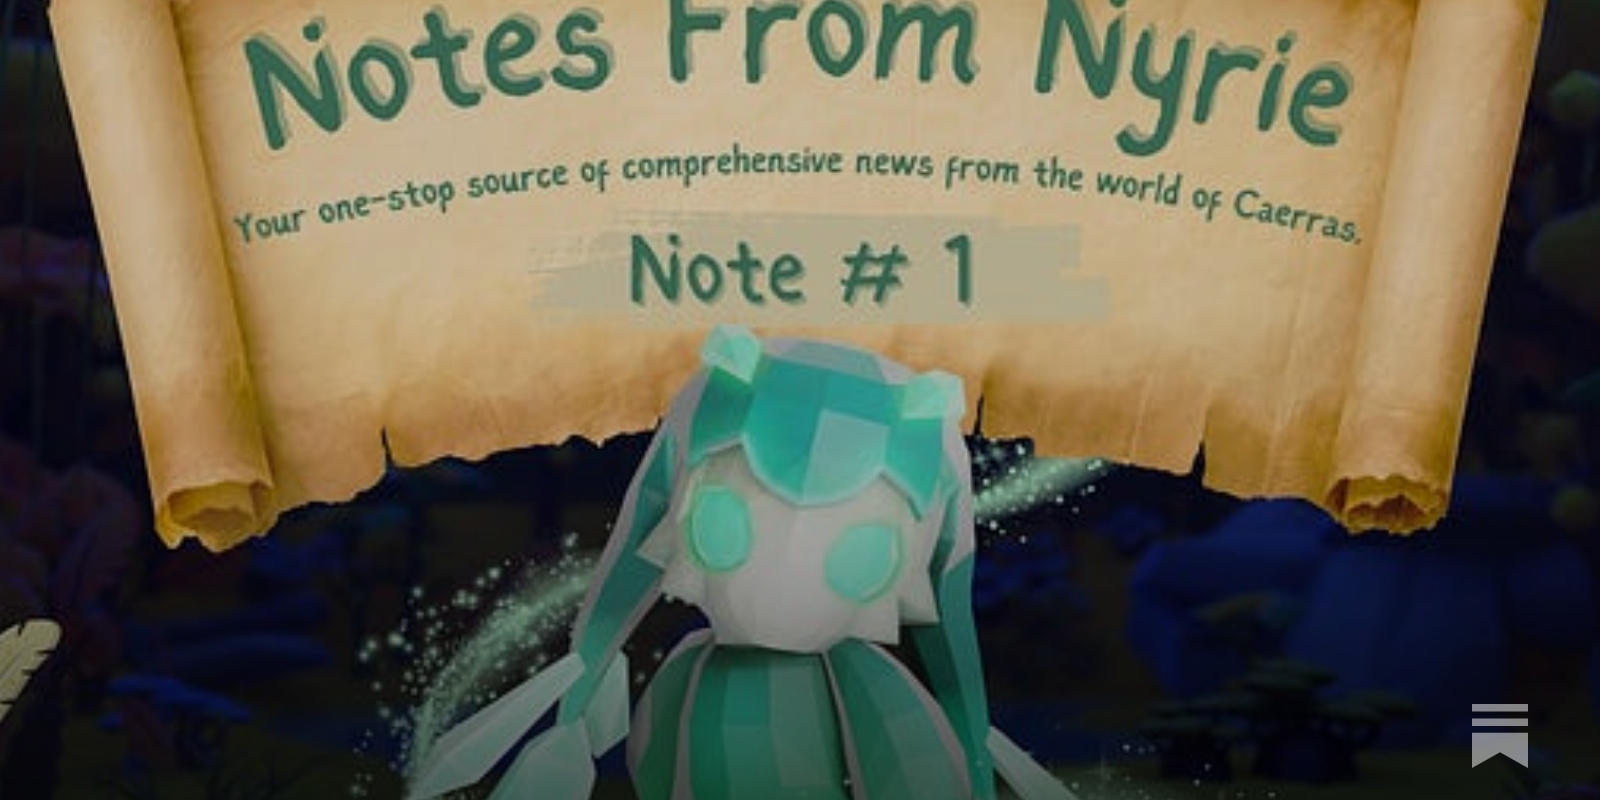 Nyrie's First Note - by Legends of Venari